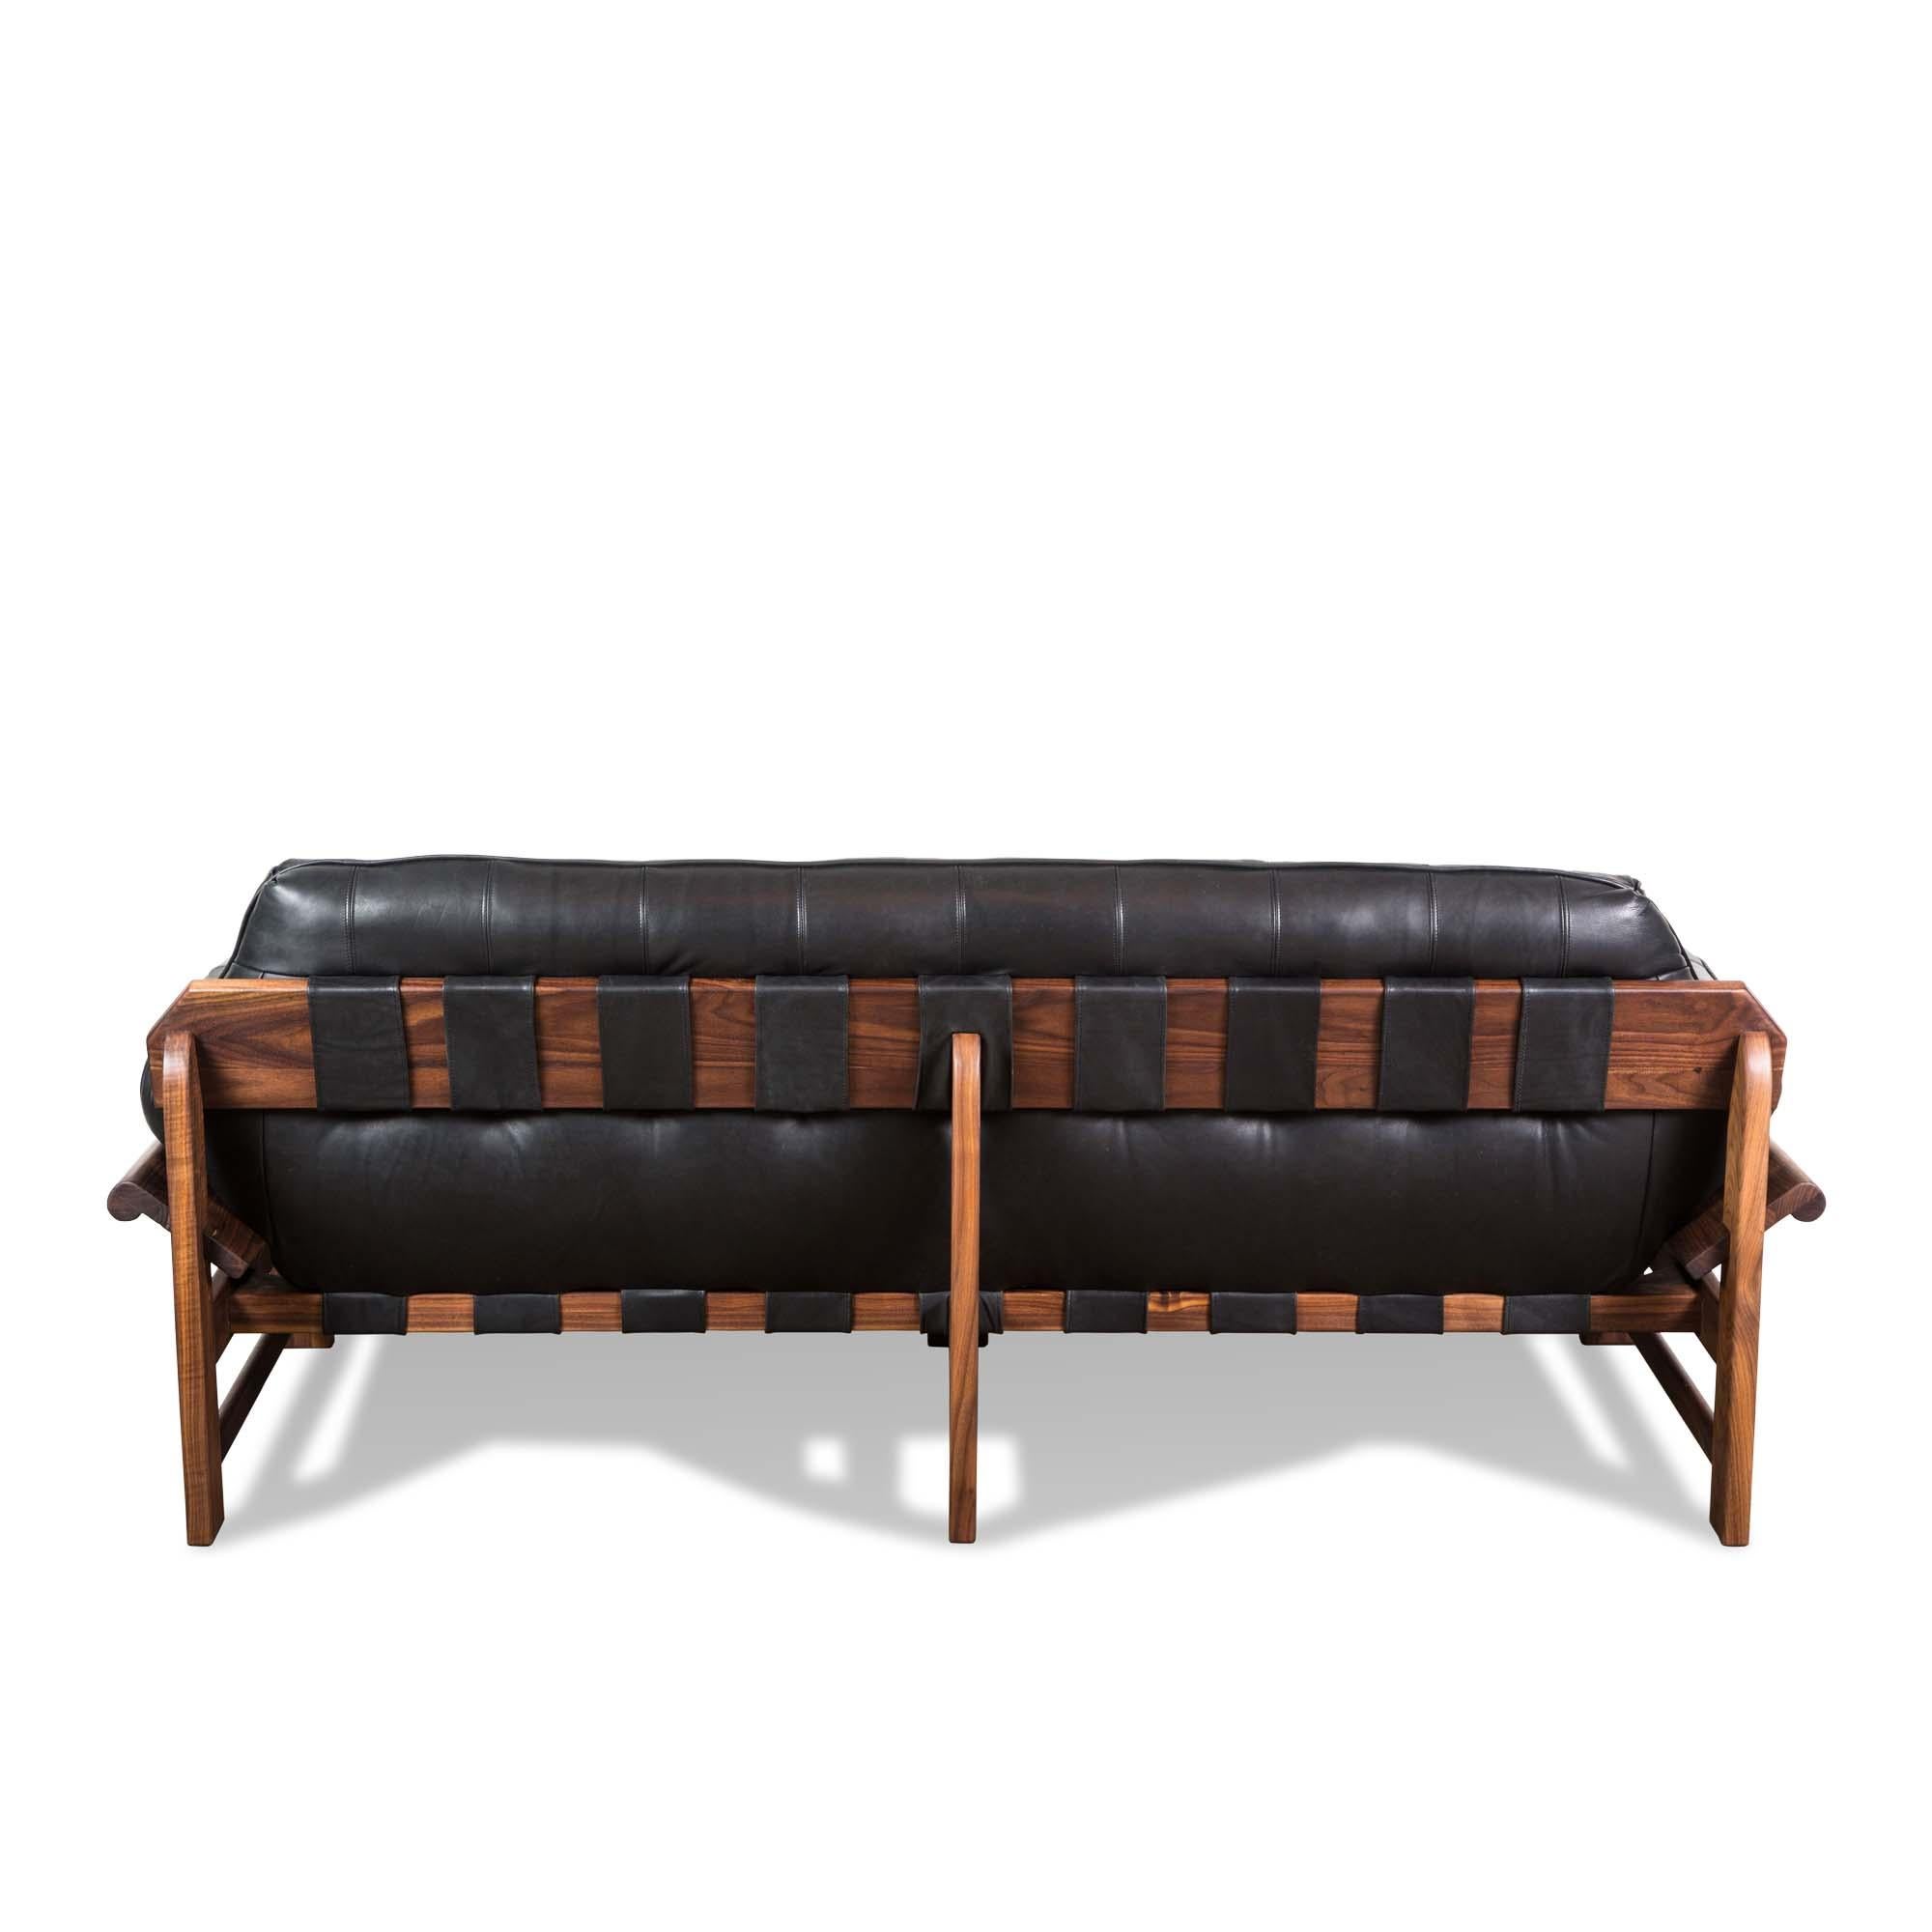 The Ojai sofa features a solid white oak or solid walnut base and a single tufted leather cushion with leather straps. 

The Lawson-Fenning Collection is designed and handmade in Los Angeles, California. Reach out to discover what options are